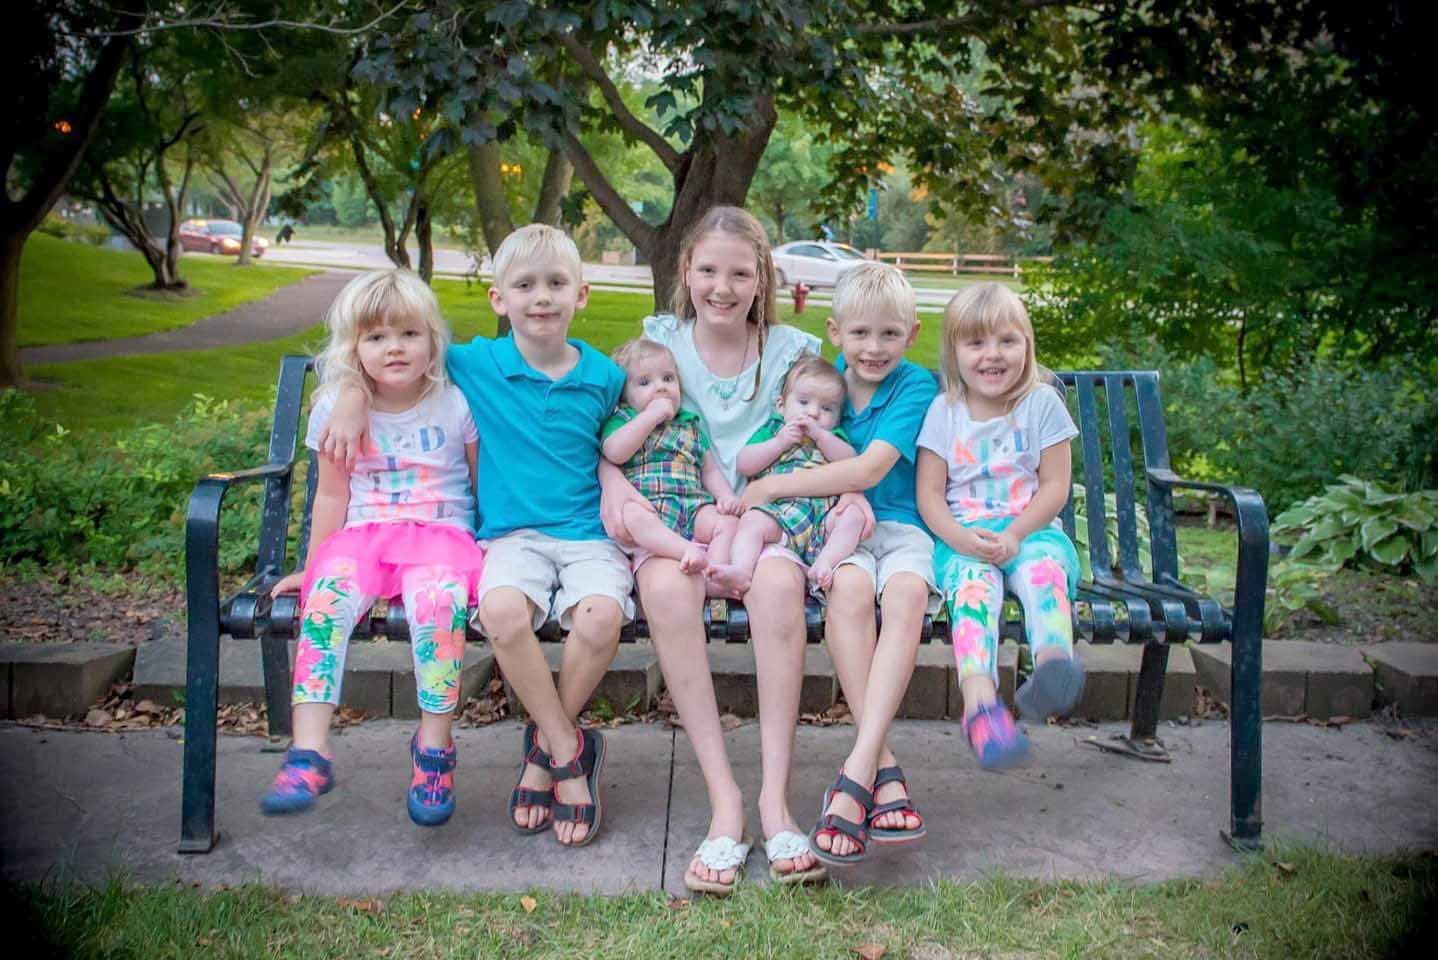 PHOTO: Seen in this undated photo, siblings Kaitlyn, 9, Cody and Caleb, both 6, Chelsea and Kelsea, both 4, Caden and Colton, both 10 months.